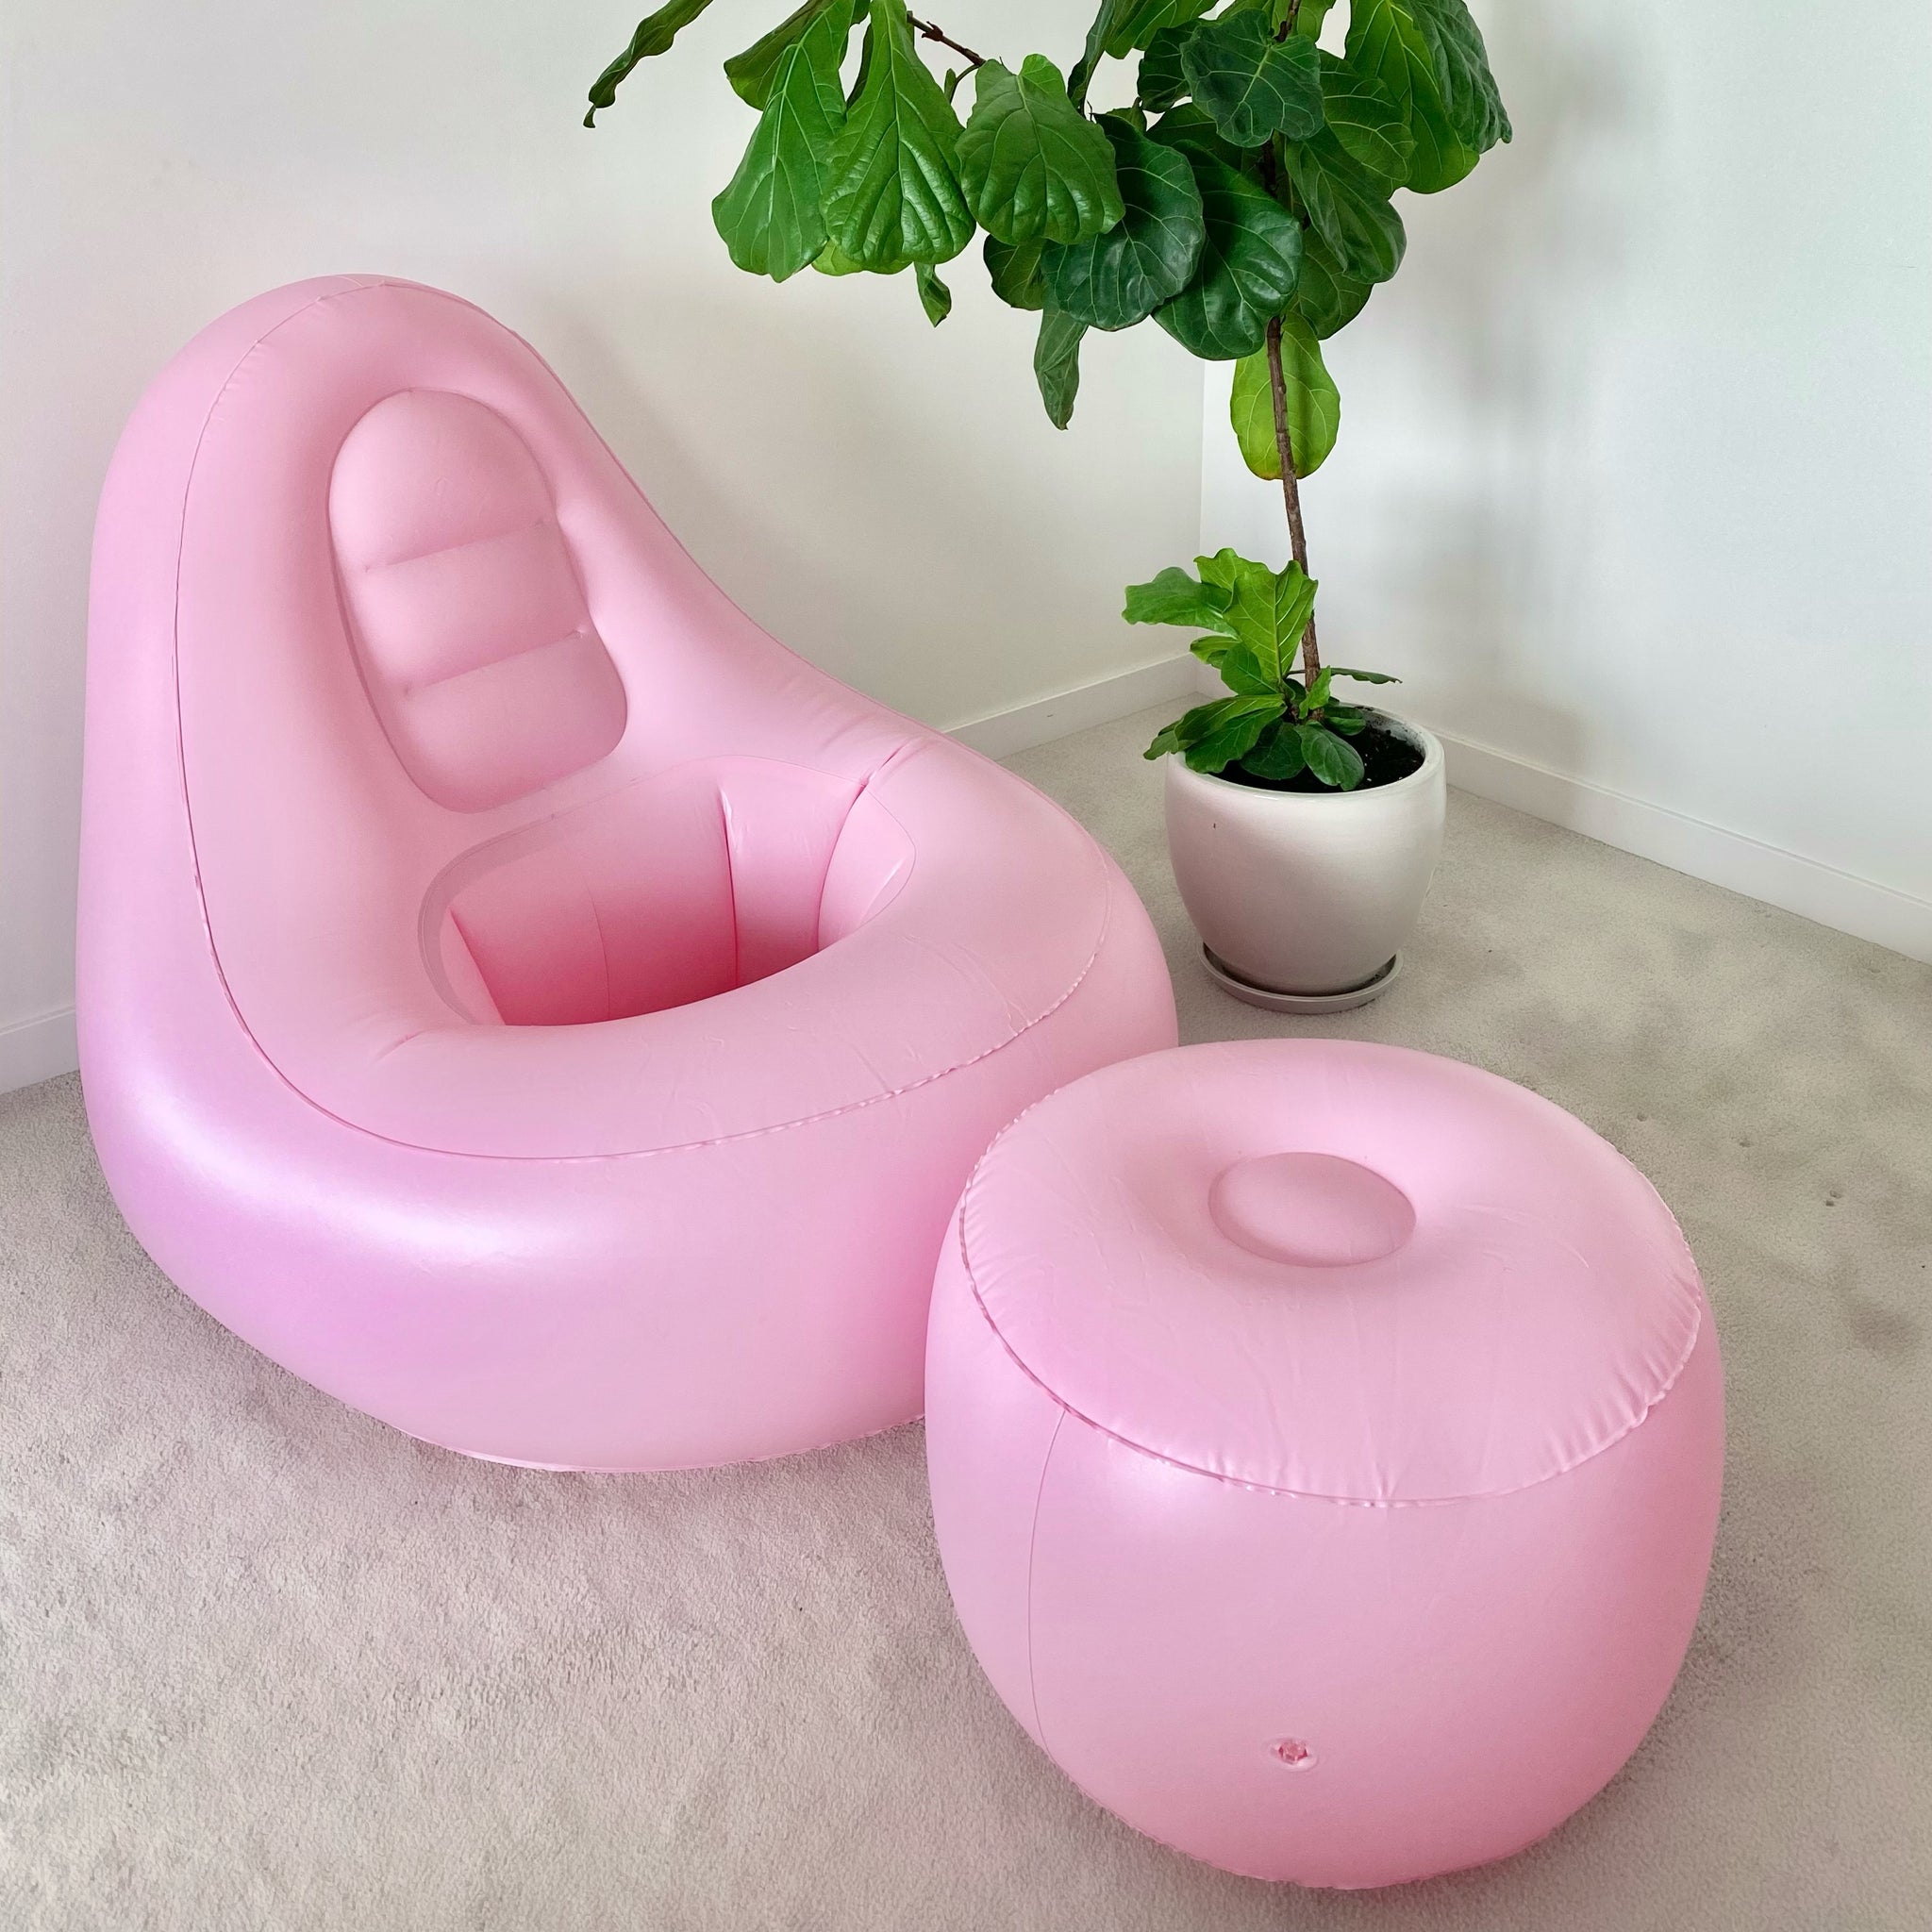 BBL Sofa Inflatable Lounger Chair Pink – Licious BBL